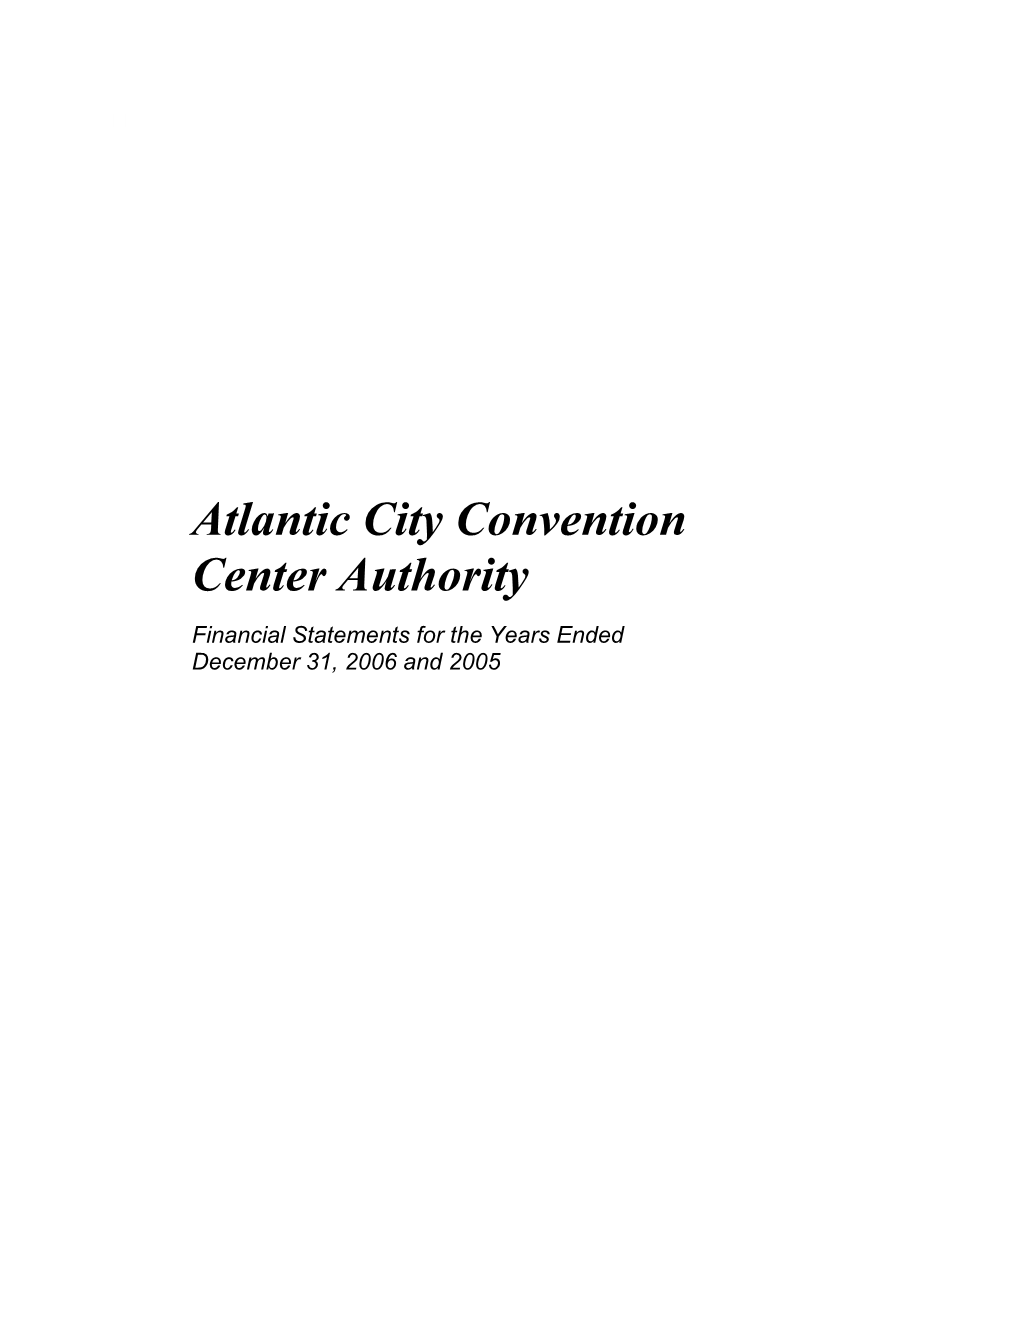 Atlantic City Convention Center Authority Financial Statements for the Years Ended December 31, 2006 and 2005 ATLANTIC CITY CONVENTION CENTER AUTHORITY